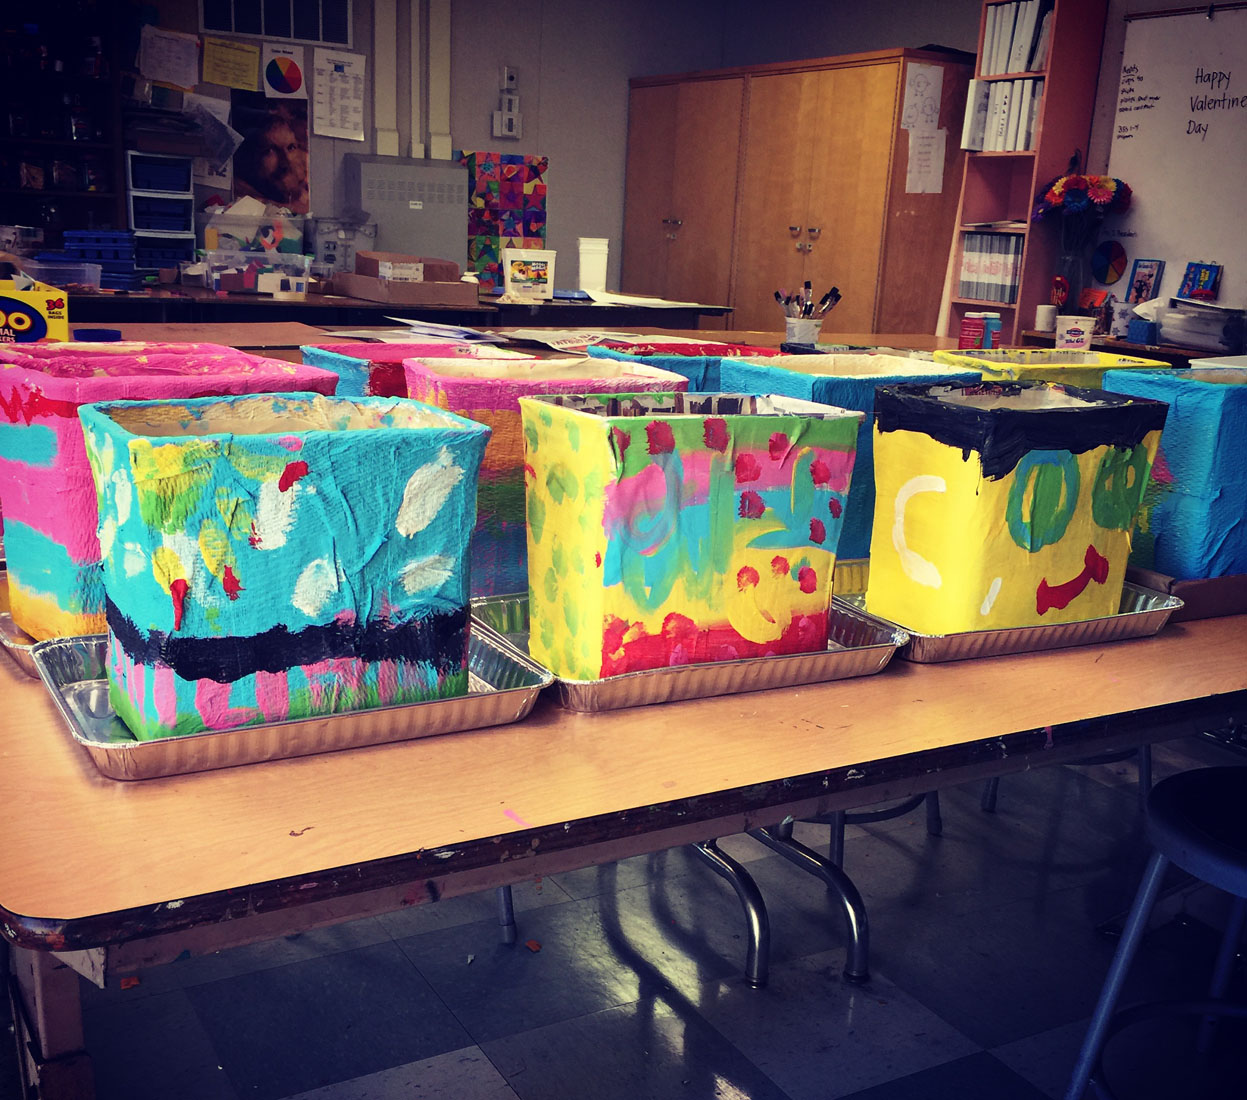 Paper Mache Cartons, Painting Day - Art Projects for Kids